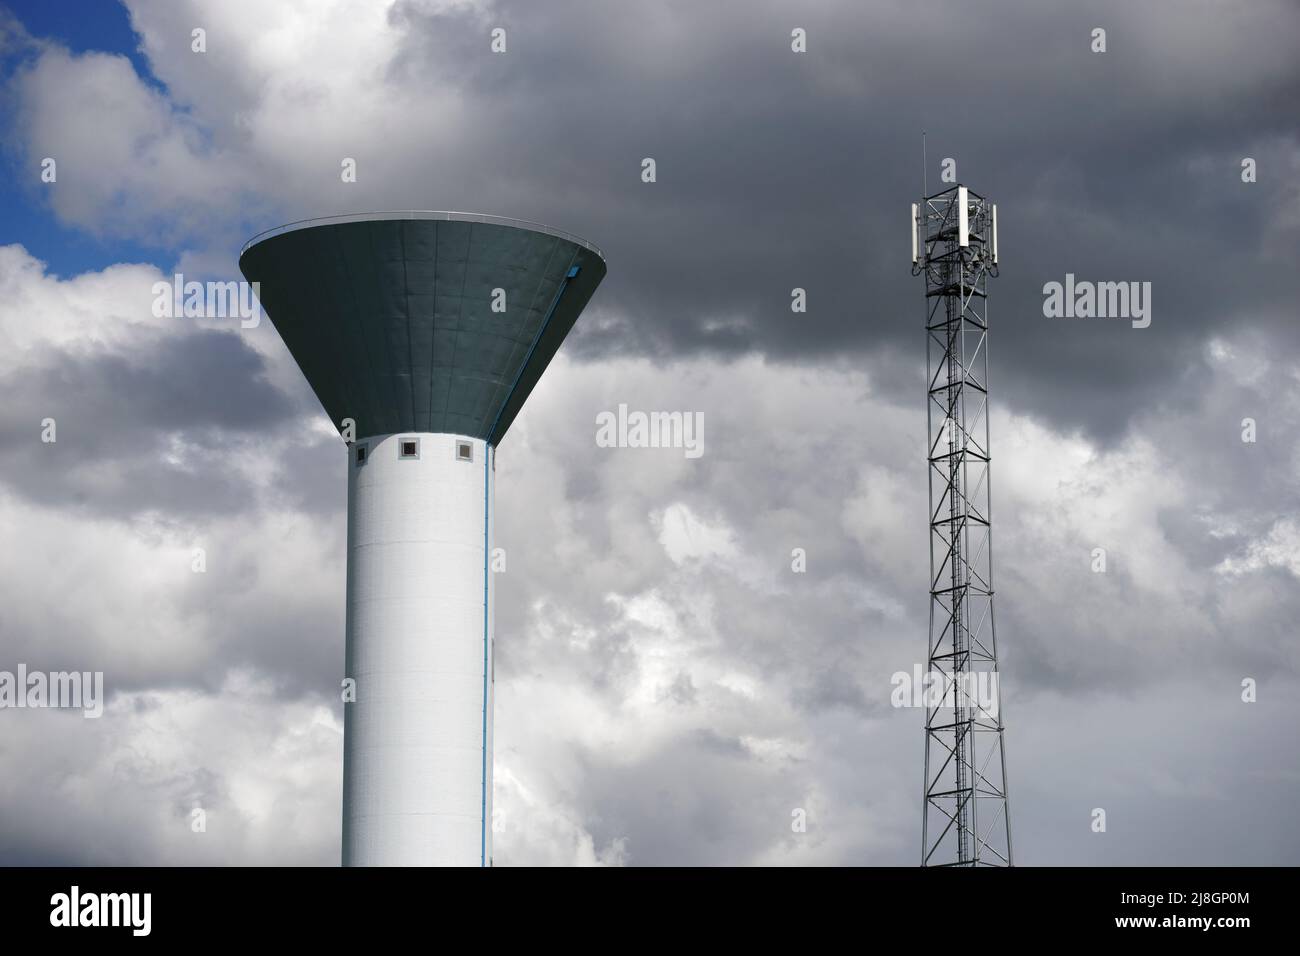 Water tower near a transmitting antenna for cellphones Stock Photo